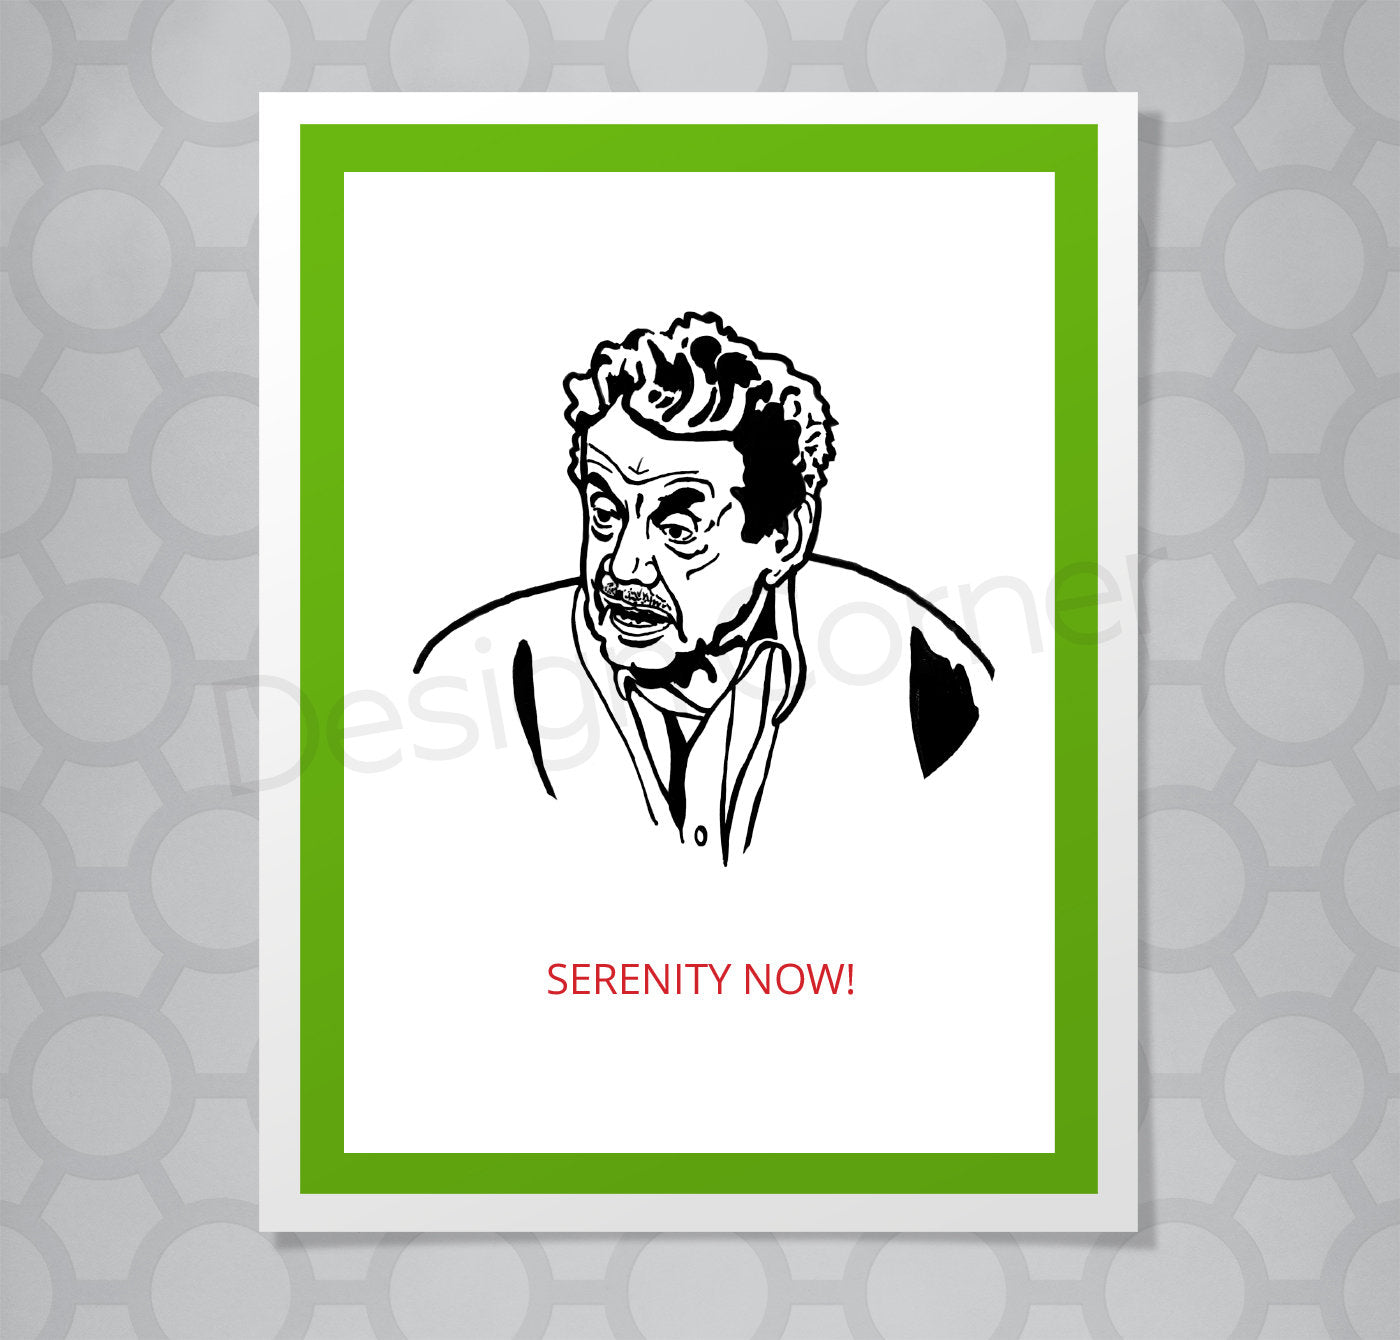 Greeting card with illustration of Seinfeld's Frank Costanza. Caption says "Serenity now!"